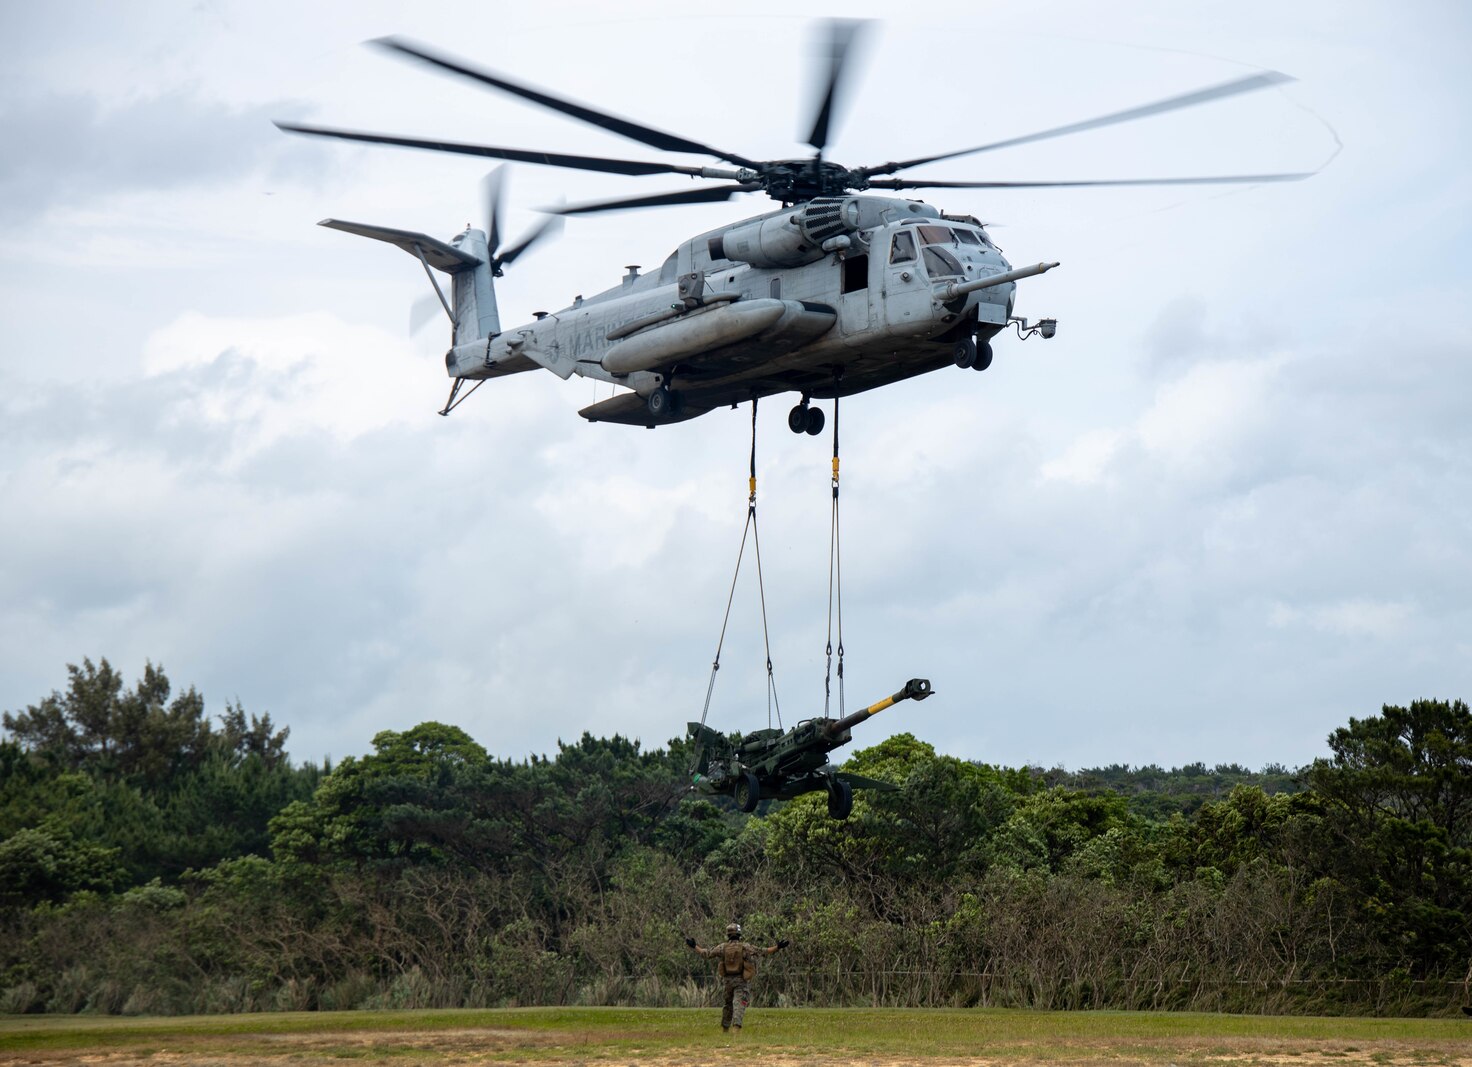 A CH-53 Sea Stallion with Heavy Marine Helicopter 466, 1st Marine Aircraft Wing, lifts an M77 howitzer during Helicopter Support Team training with Marines from  3rd Transportation Battalion, Combat Logistics Regiment 3 and 3rd Battalion, 12th Marine Regiment, 3rd Marine Division at Camp Hansen, Okinawa, Japan, Apr. 21, 2022.